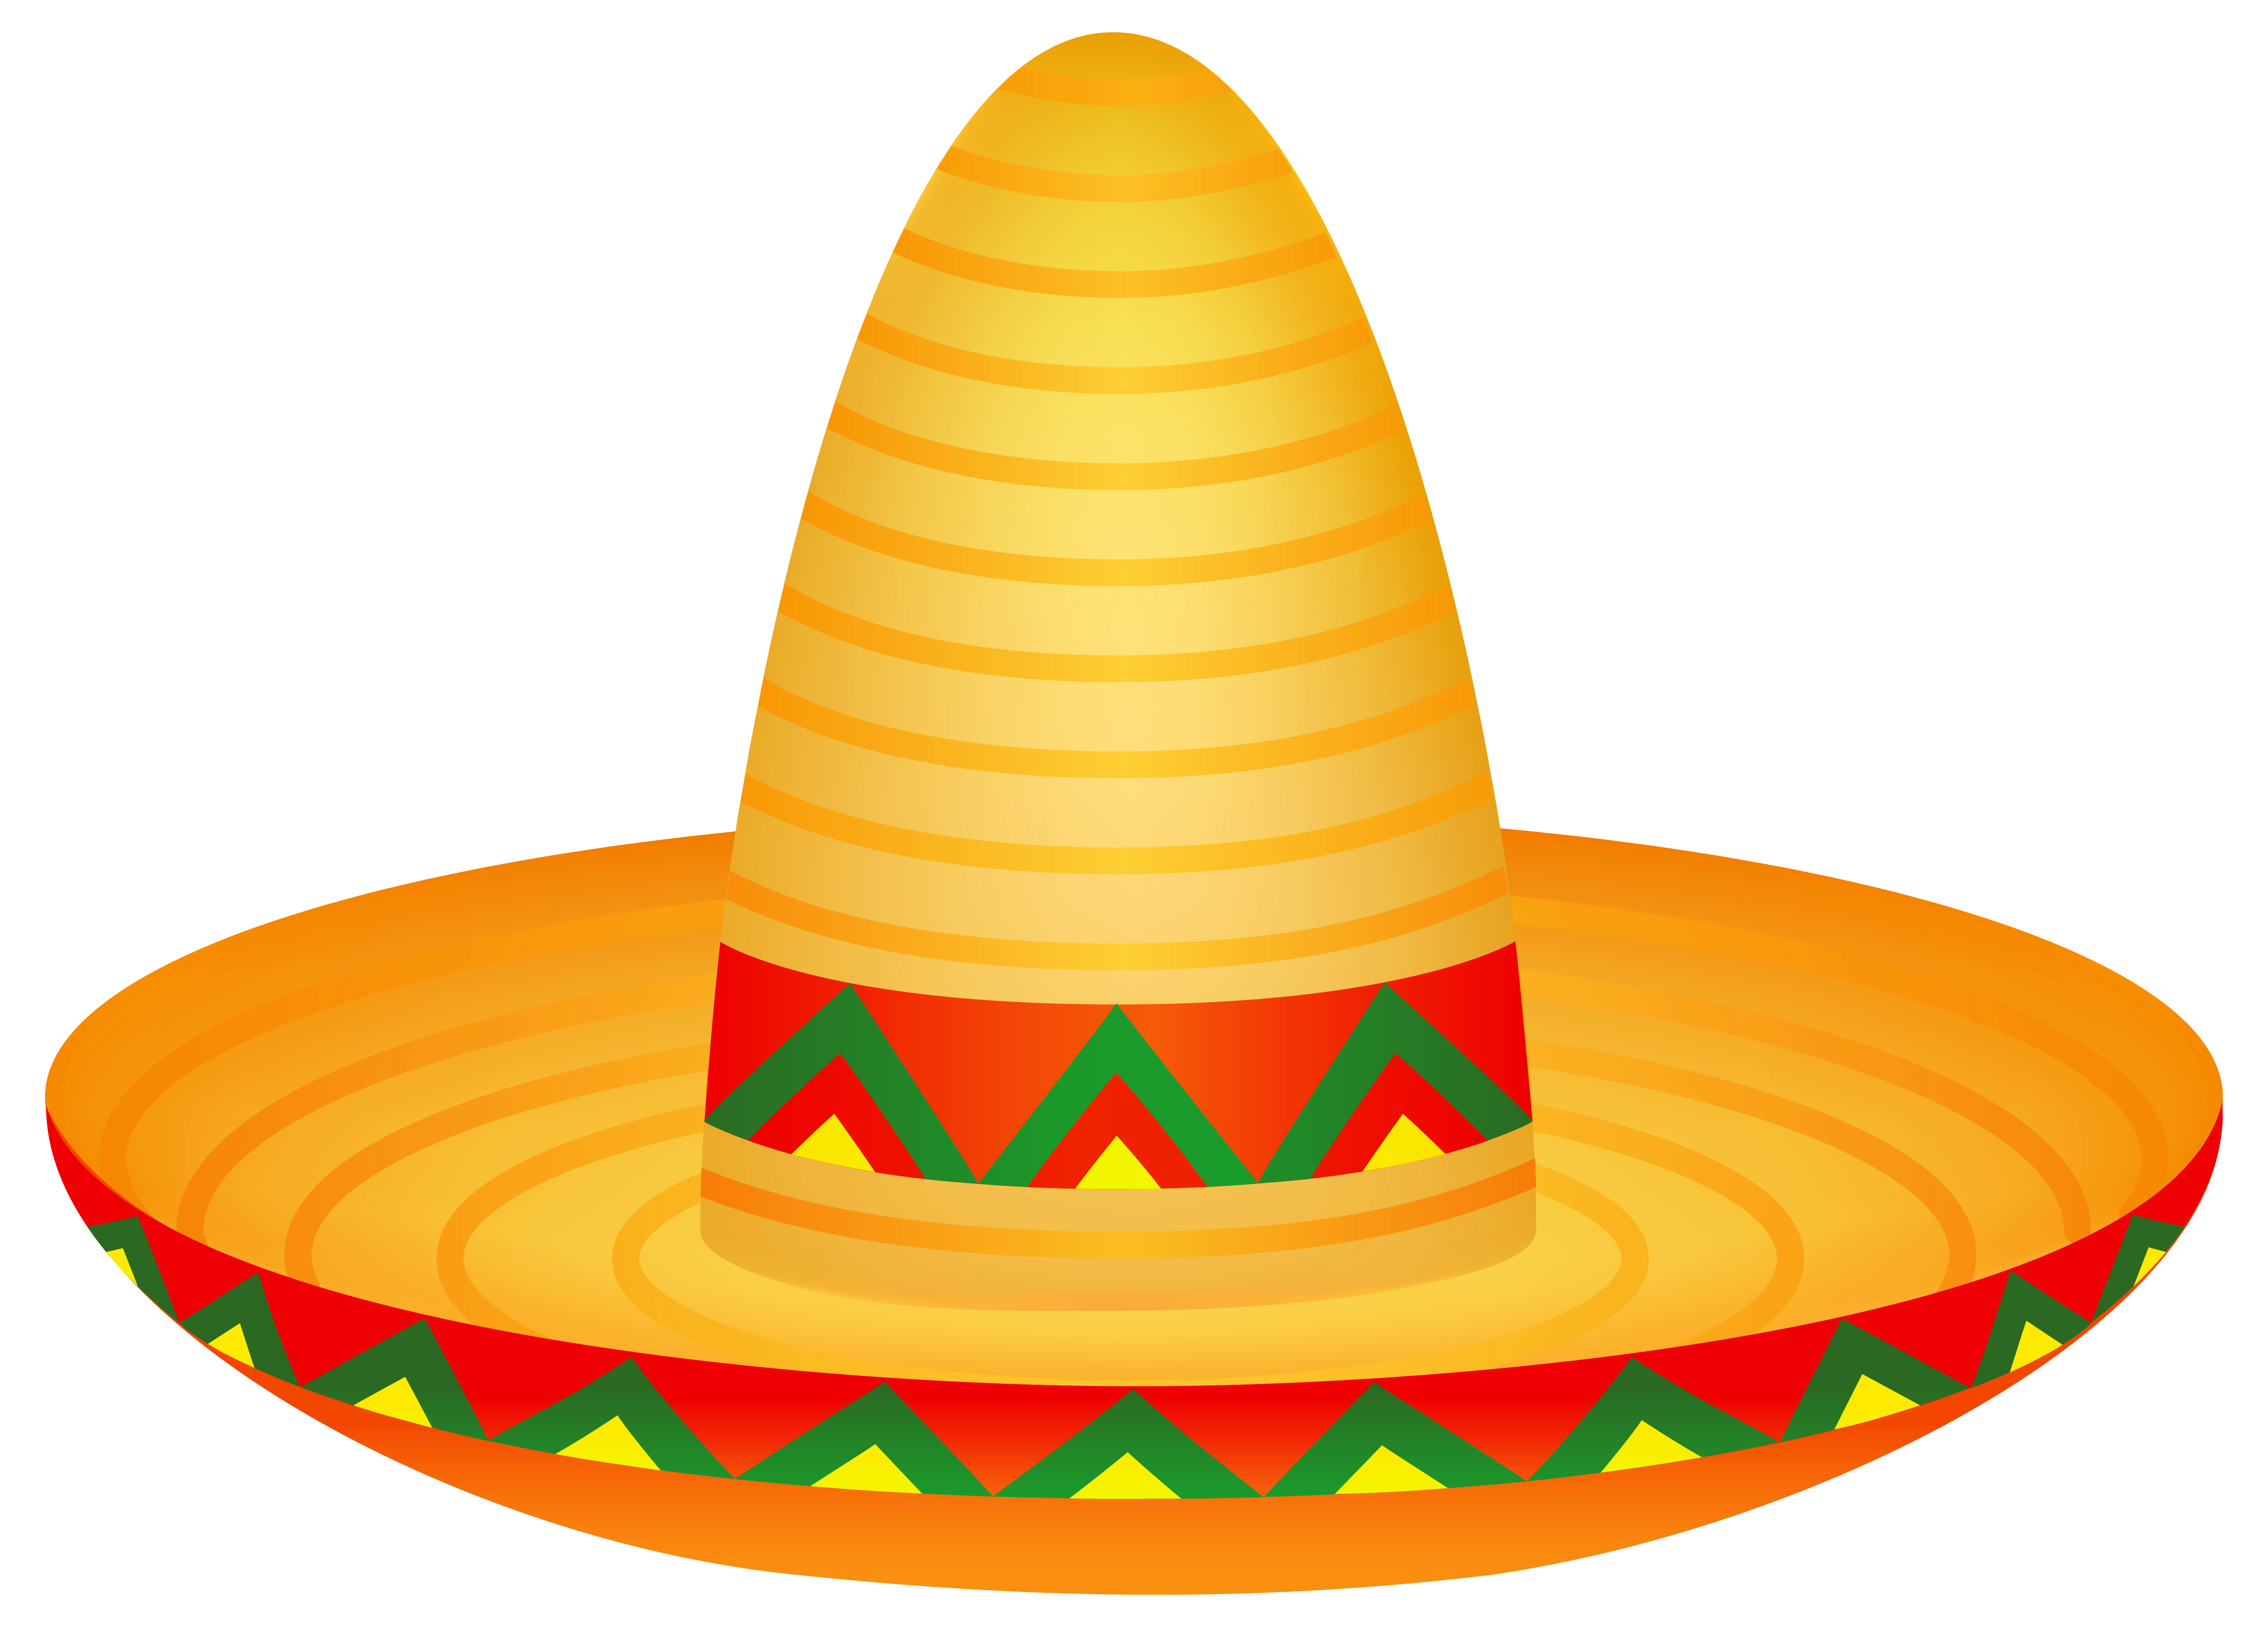 Mexican Sombrero PNG Clipart Image